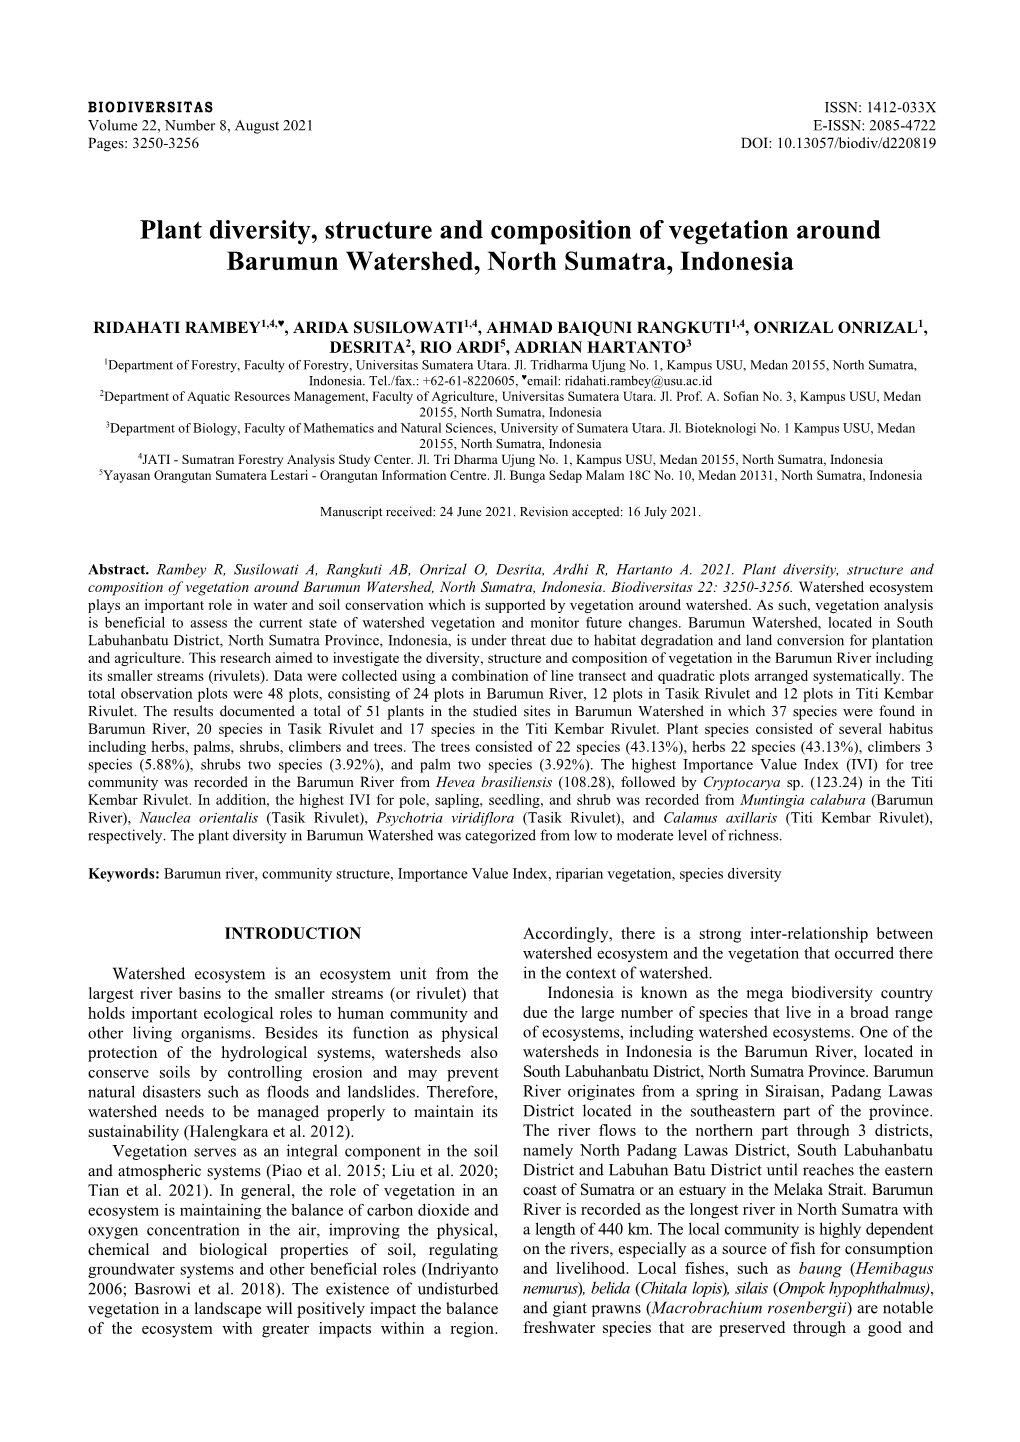 Plant Diversity, Structure and Composition of Vegetation Around Barumun Watershed, North Sumatra, Indonesia